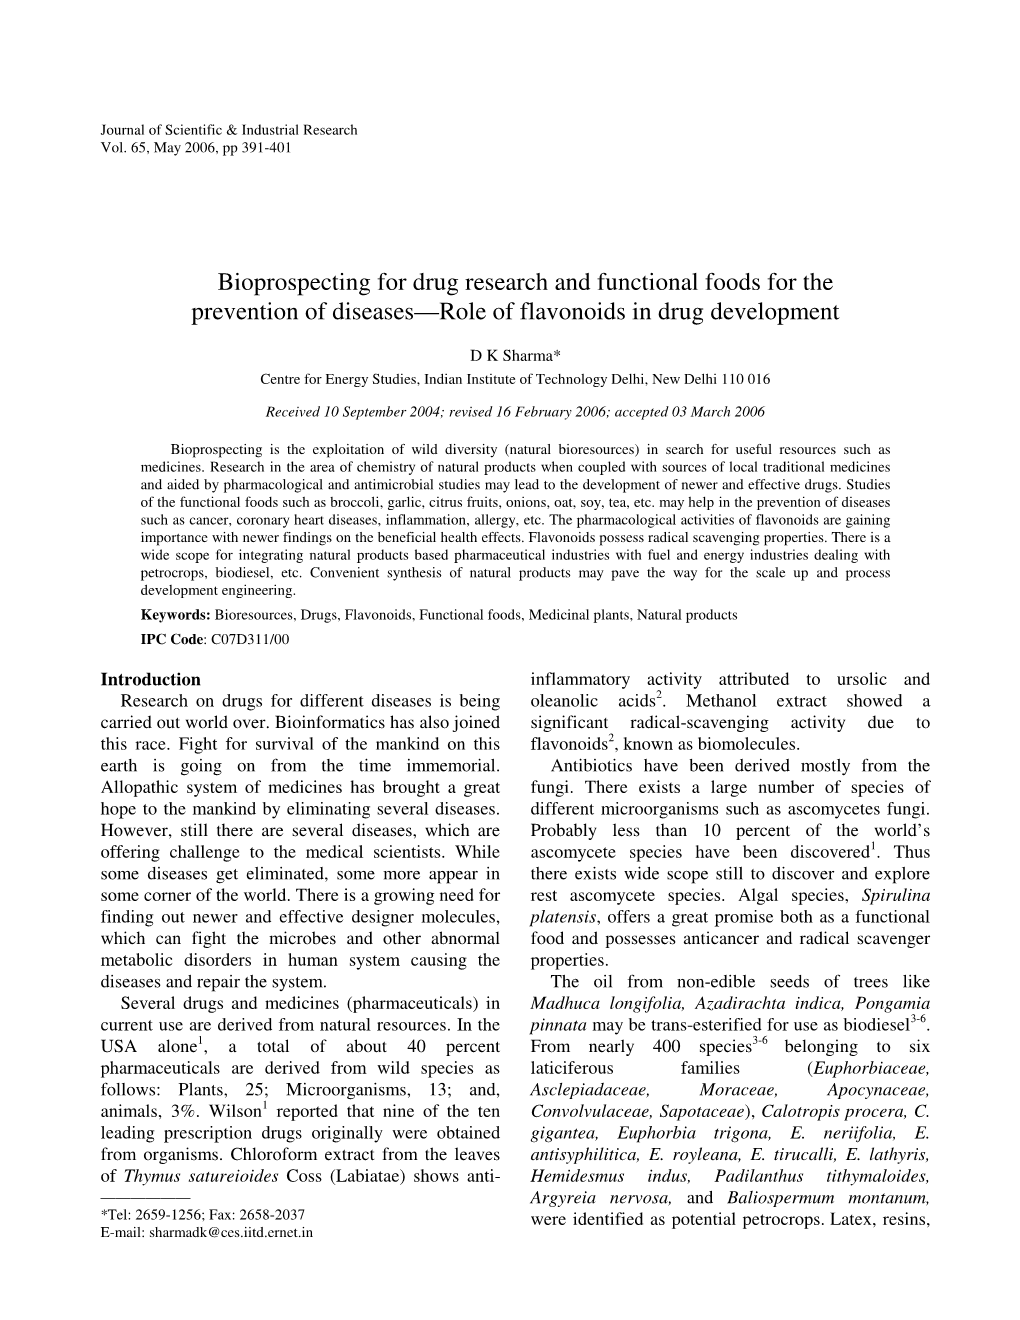 Bioprospecting for Drug Research and Functional Foods for the Prevention of Diseases—Role of Flavonoids in Drug Development